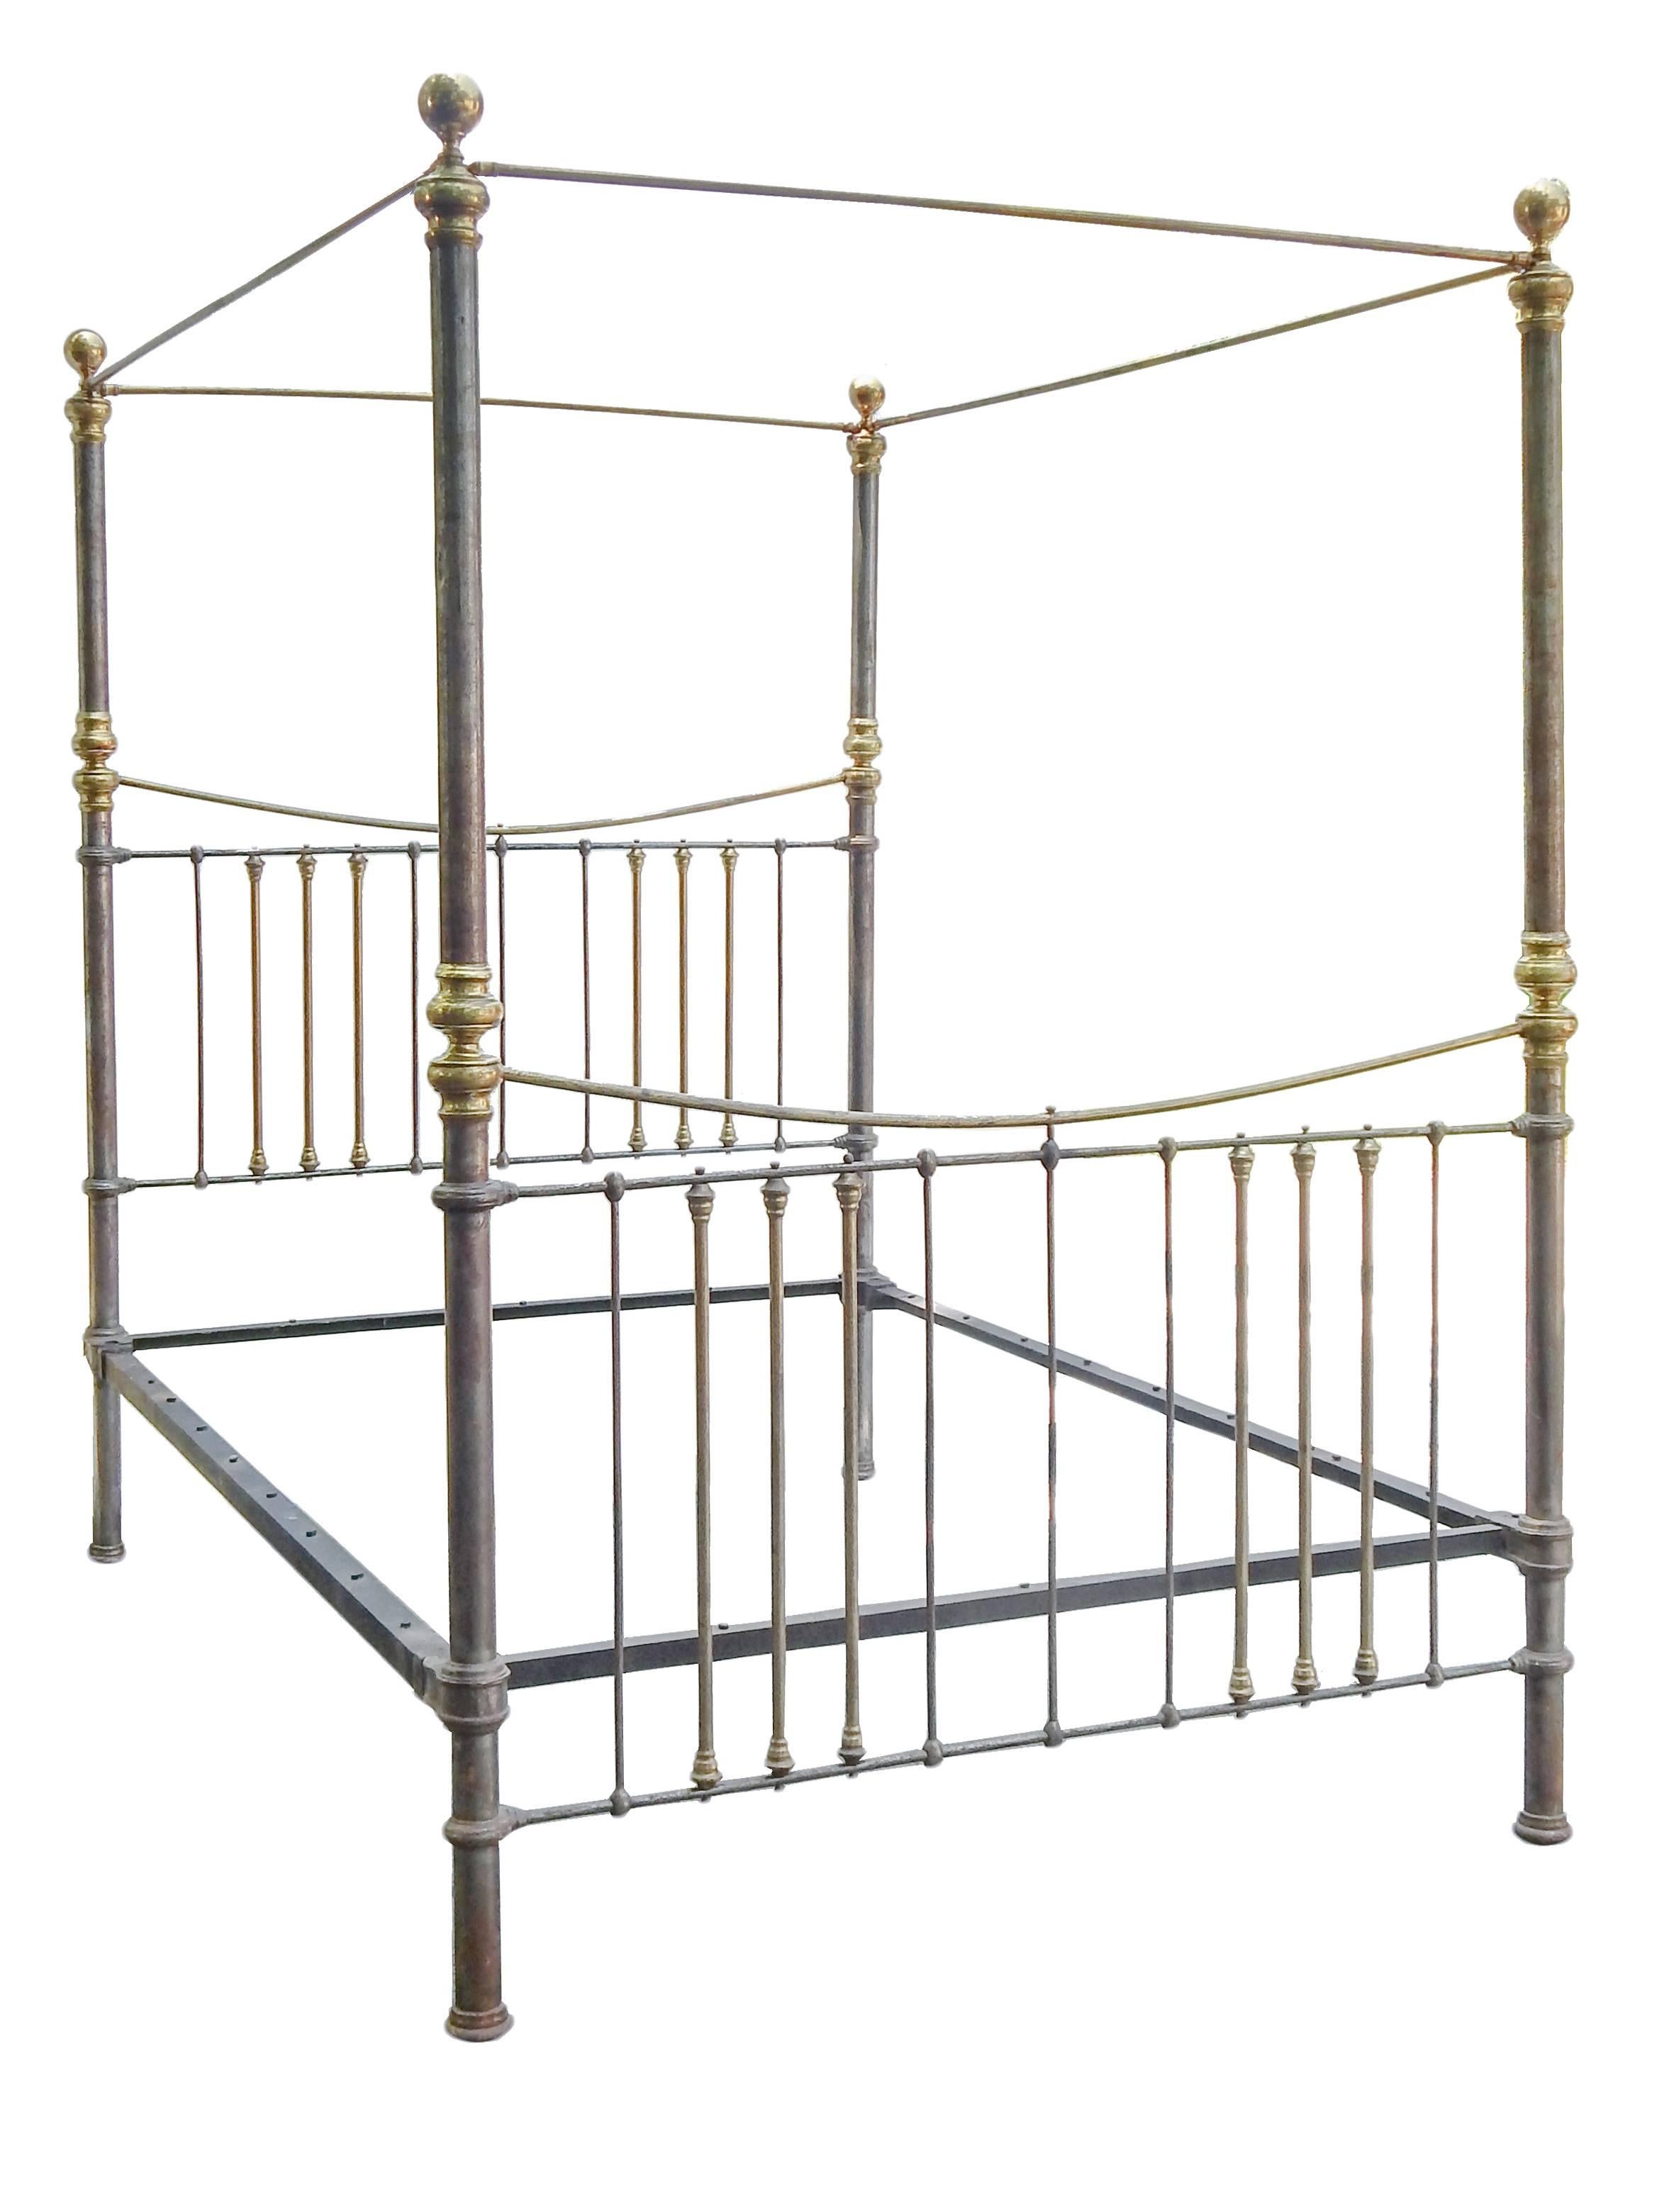 Rare iron and brass canopy bed, queen size.
Interior measurements are 59